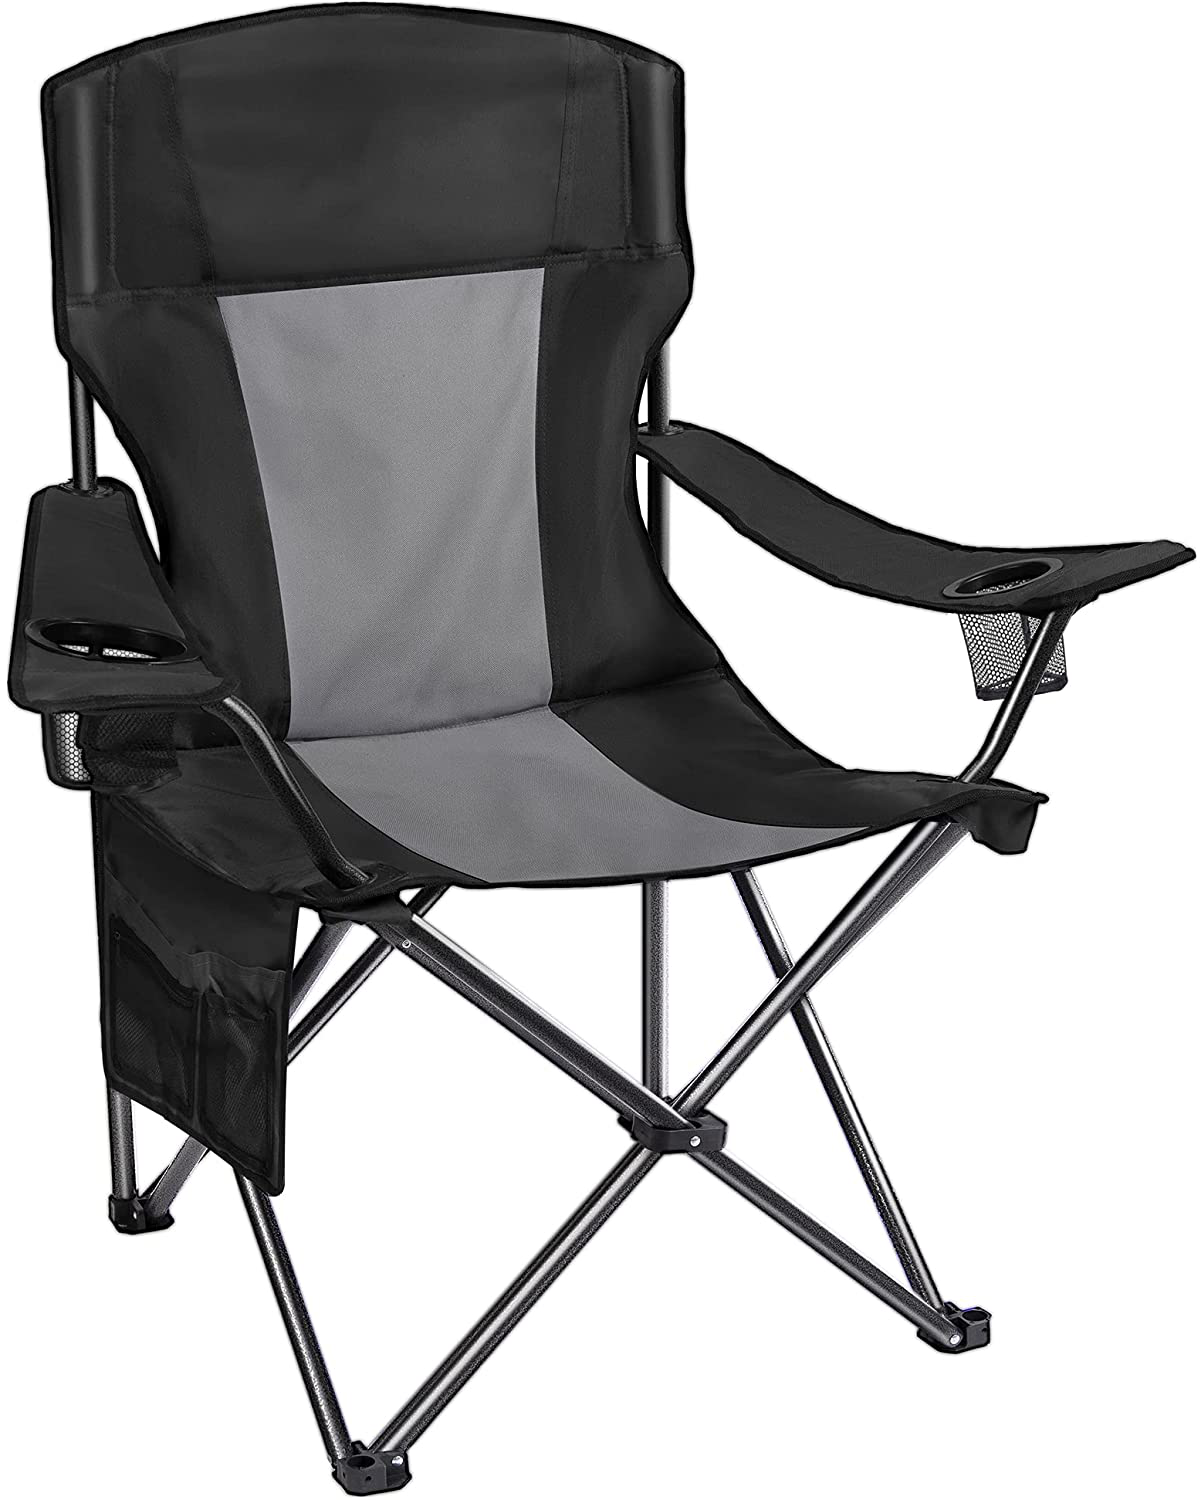 Folding Chairs For Outdoor